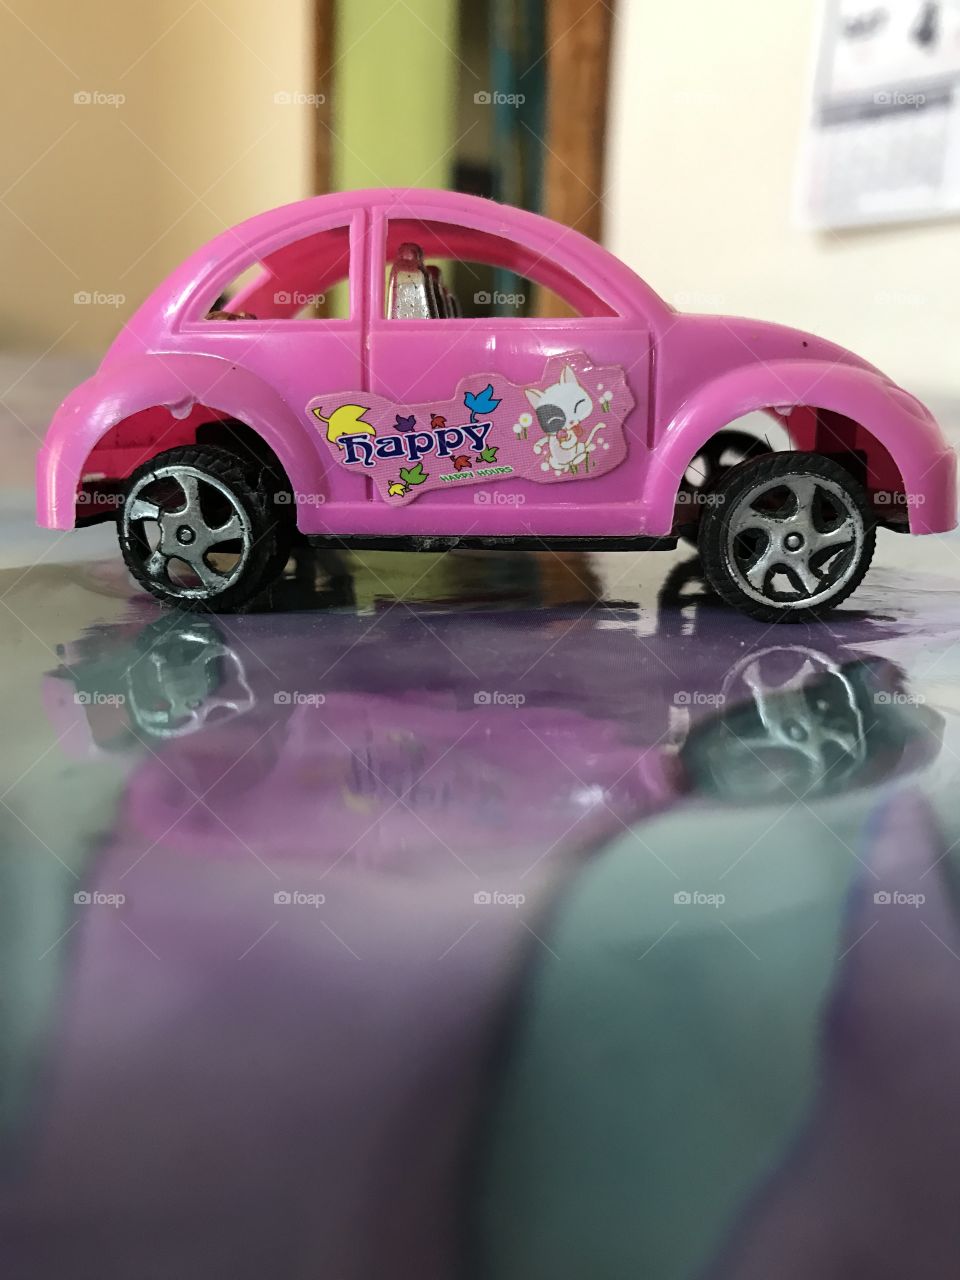 Girly pink toy car 